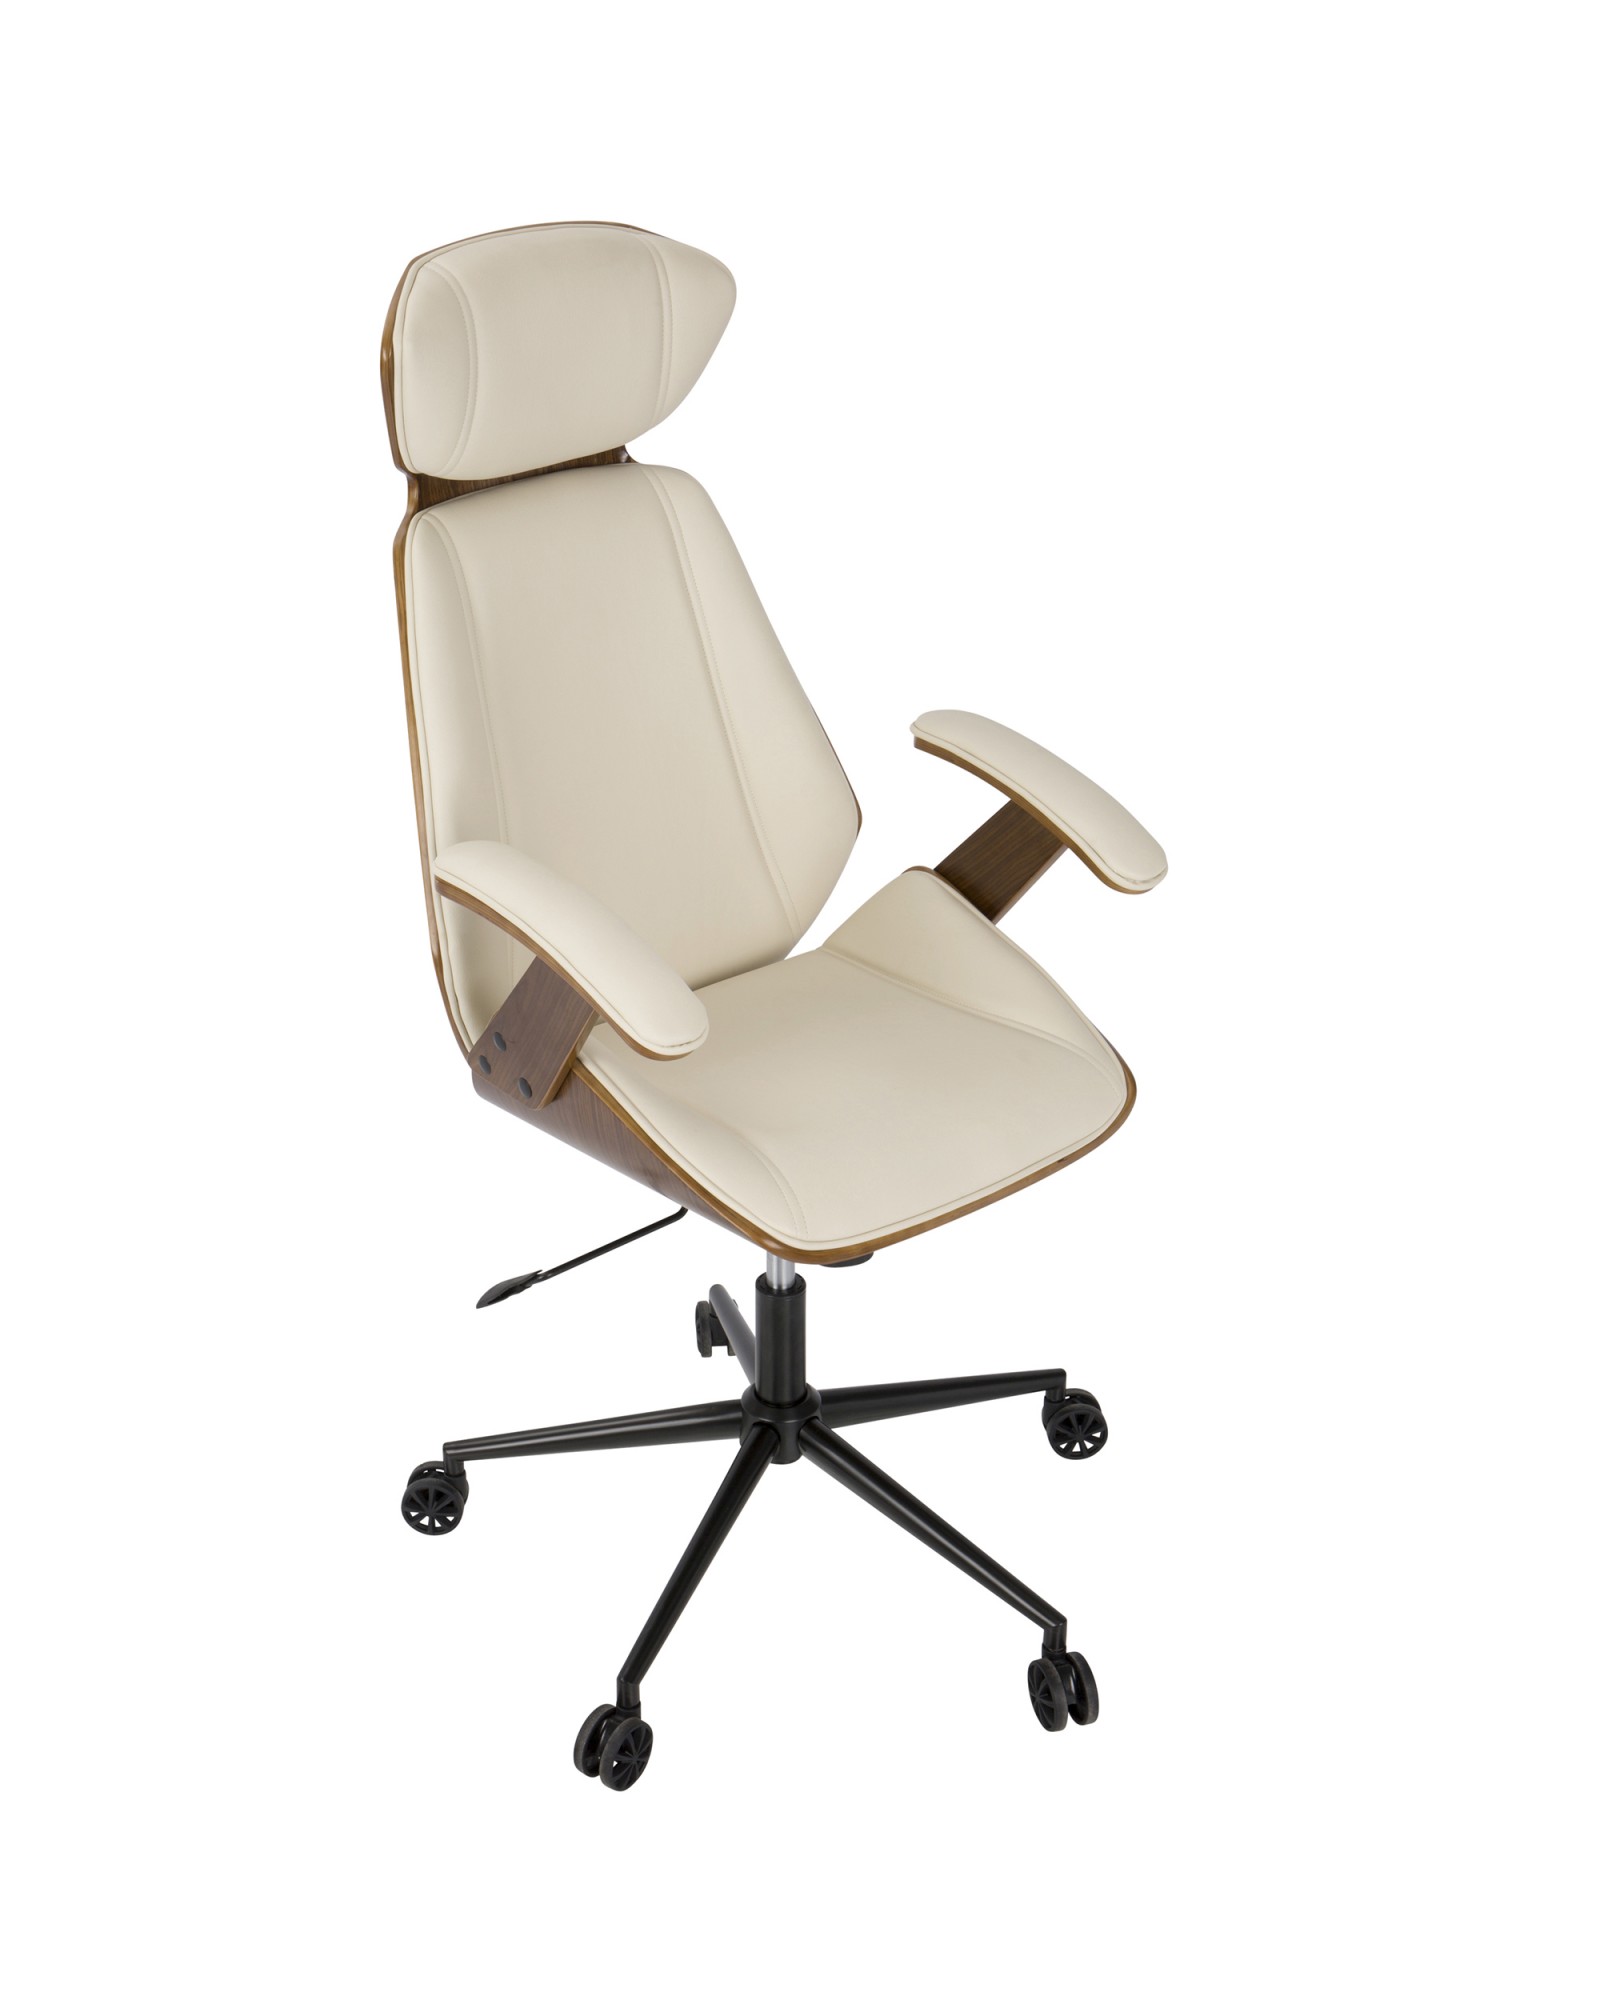 Spectre Mid-Century Modern Adjustable Office Chair in Walnut Wood and Cream Faux Leather